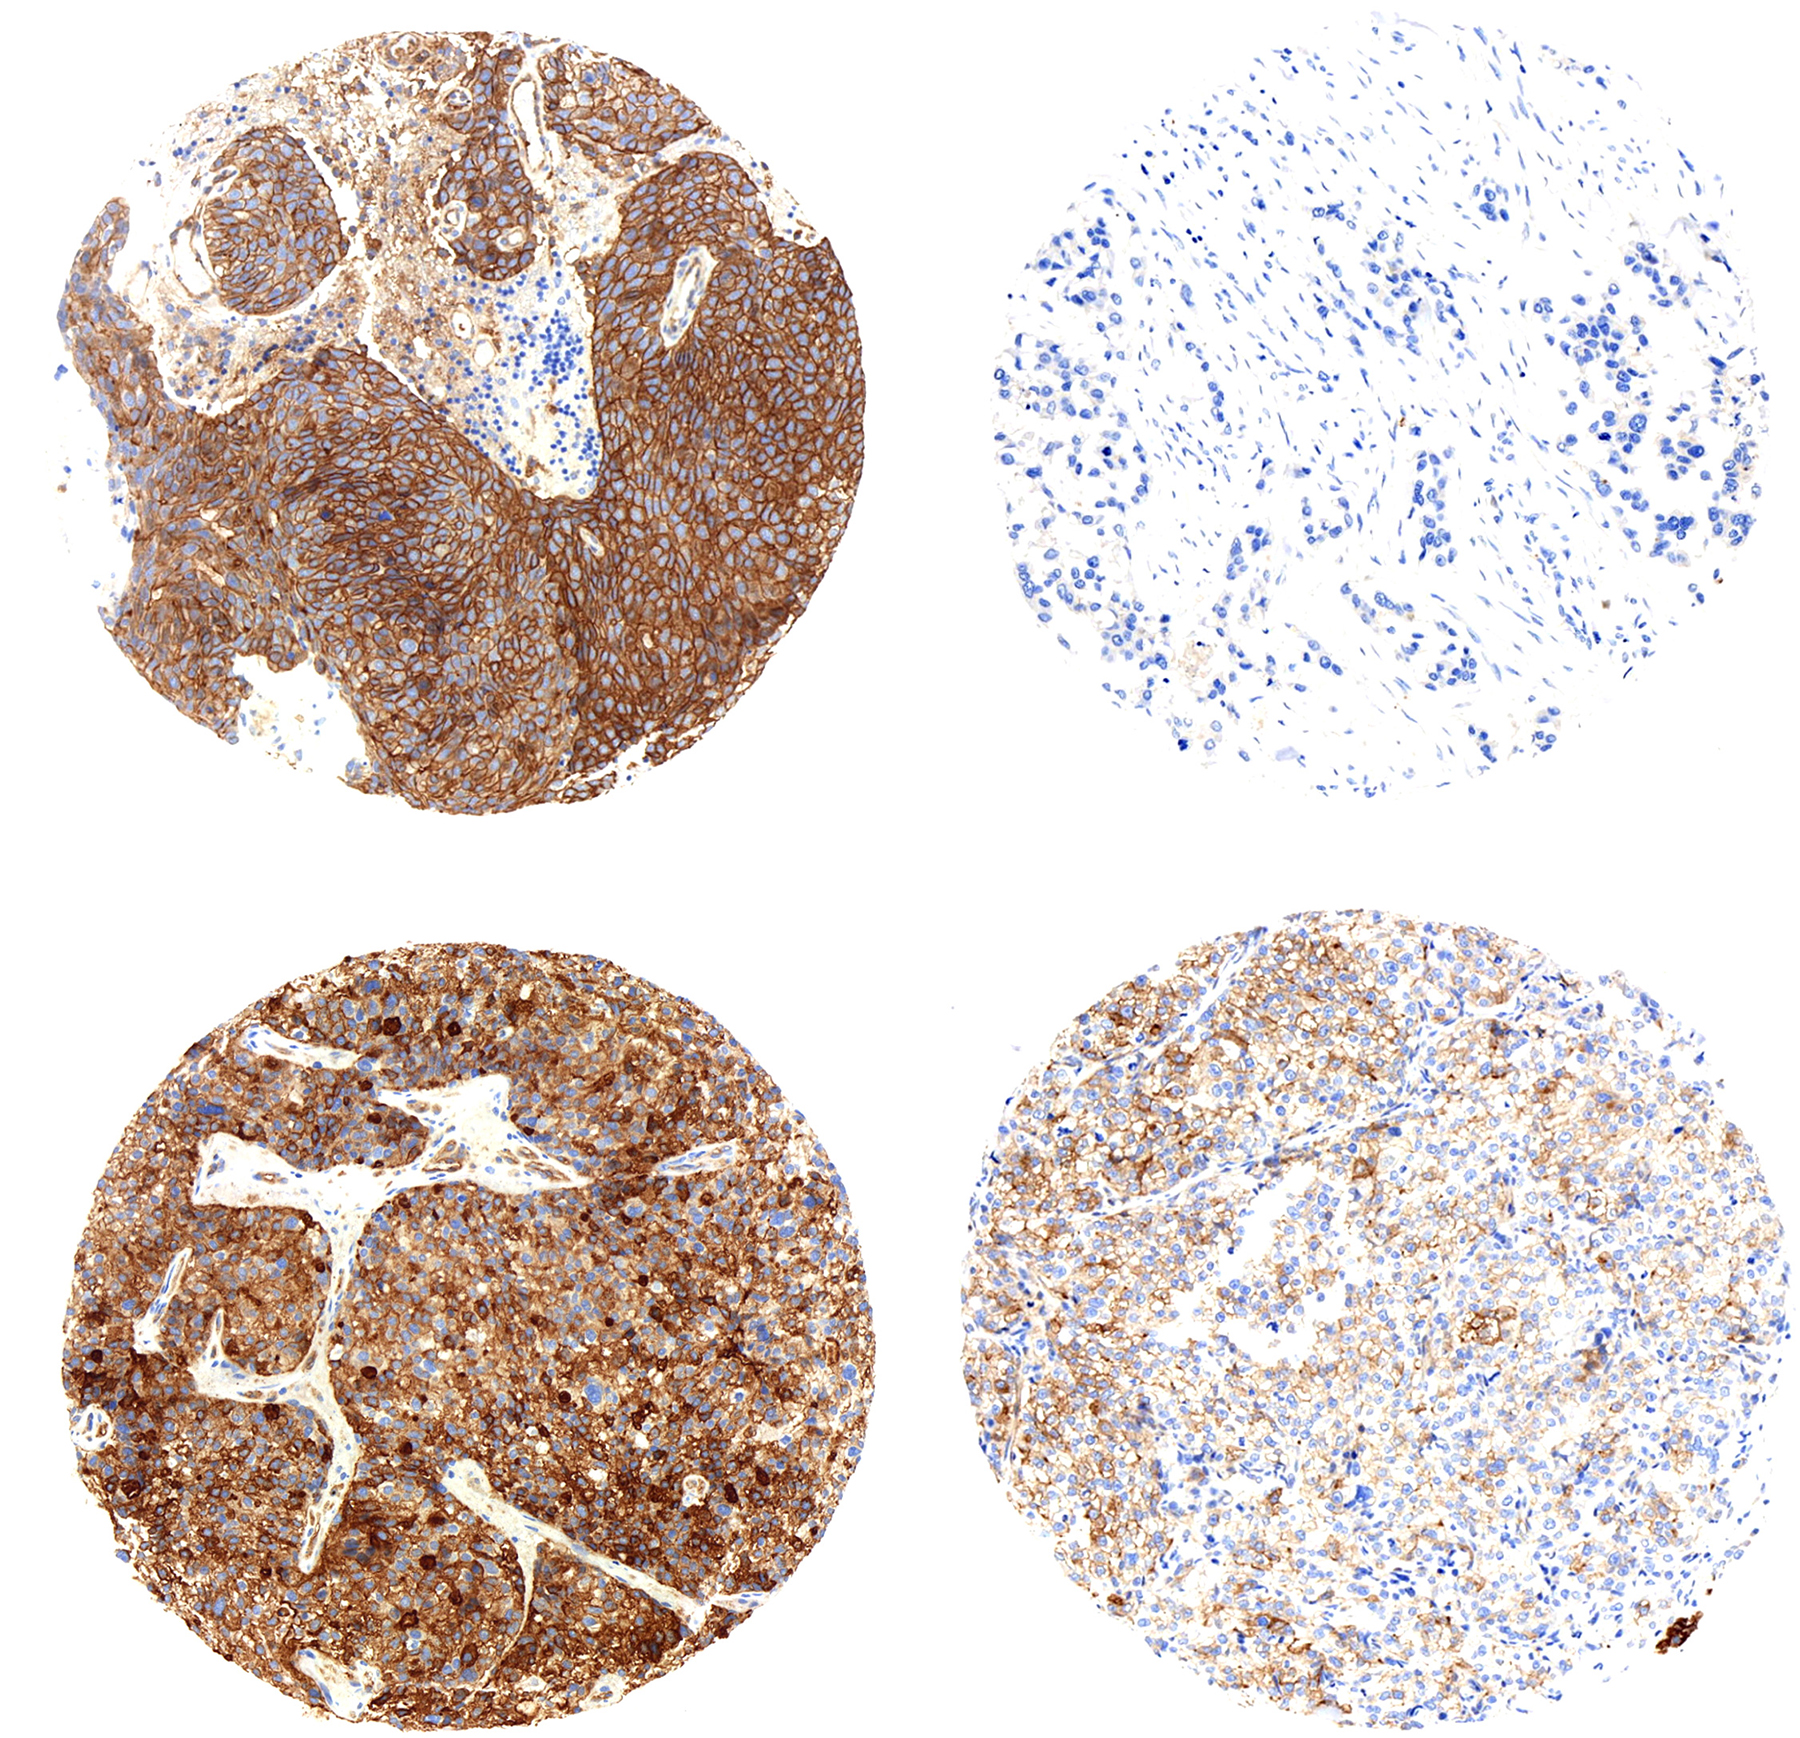 ngTMA® technology: Immunostaining of pGluN2B (Y1252) in brain metastases (Left column) and immunostaining of pGluN2B (Y1252) in breast primary tumor (Right column). Translational Research Unit. Institute of Pathology – University of Bern.